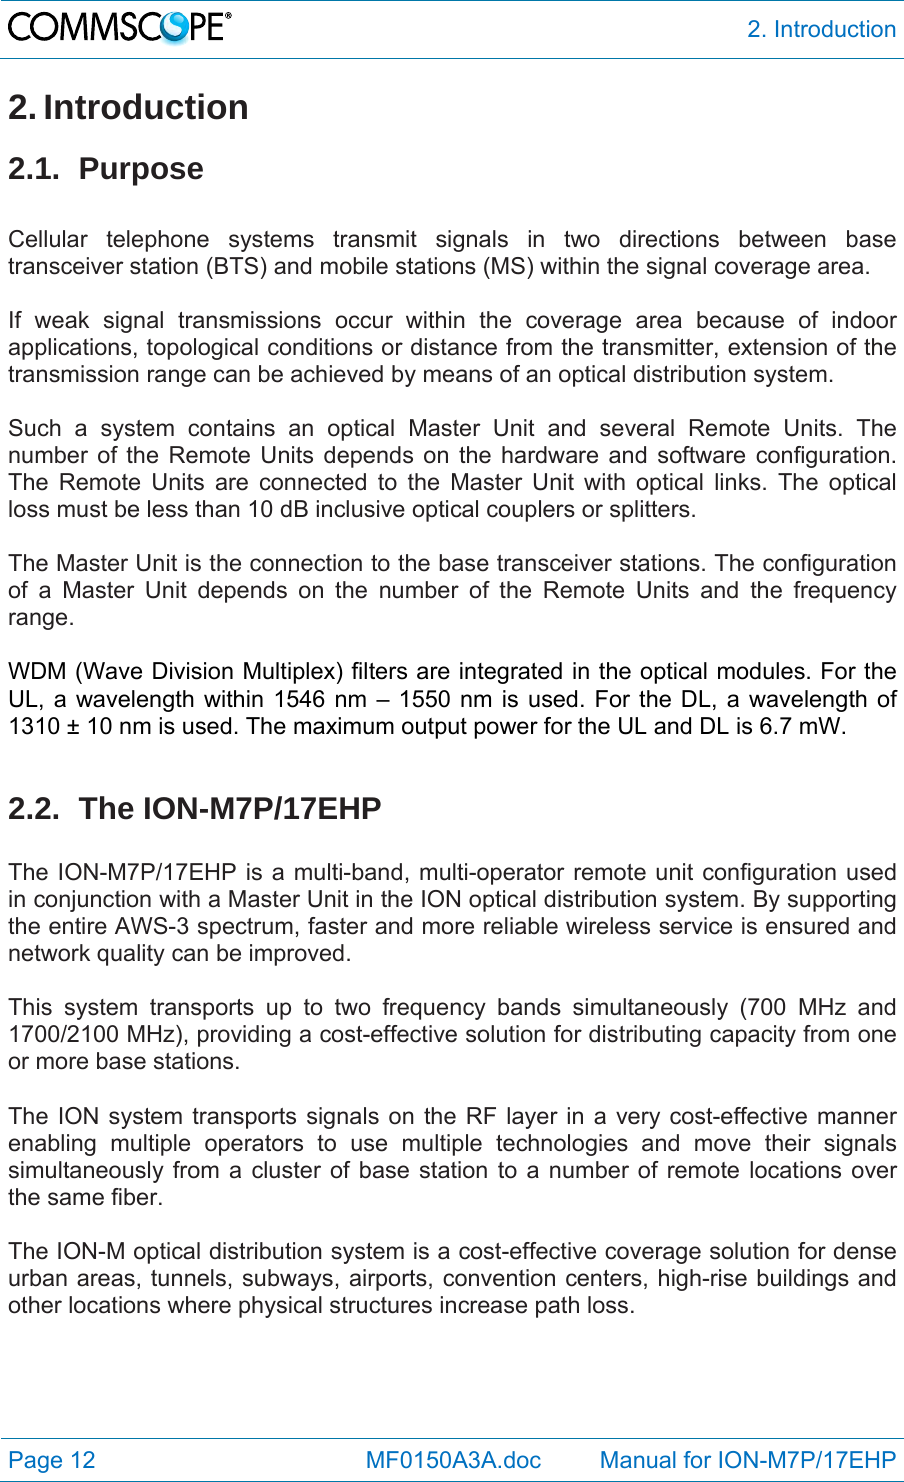  2. Introduction Page 12            MF0150A3A.doc         Manual for ION-M7P/17EHP 2. Introduction 2.1. Purpose  Cellular telephone systems transmit signals in two directions between base transceiver station (BTS) and mobile stations (MS) within the signal coverage area.  If weak signal transmissions occur within the coverage area because of indoor applications, topological conditions or distance from the transmitter, extension of the transmission range can be achieved by means of an optical distribution system.  Such a system contains an optical Master Unit and several Remote Units. The number of the Remote Units depends on the hardware and software configuration. The Remote Units are connected to the Master Unit with optical links. The optical loss must be less than 10 dB inclusive optical couplers or splitters.  The Master Unit is the connection to the base transceiver stations. The configuration of a Master Unit depends on the number of the Remote Units and the frequency range.   WDM (Wave Division Multiplex) filters are integrated in the optical modules. For the UL, a wavelength within 1546 nm – 1550 nm is used. For the DL, a wavelength of 1310 ± 10 nm is used. The maximum output power for the UL and DL is 6.7 mW.  2.2. The ION-M7P/17EHP  The ION-M7P/17EHP is a multi-band, multi-operator remote unit configuration used in conjunction with a Master Unit in the ION optical distribution system. By supporting the entire AWS-3 spectrum, faster and more reliable wireless service is ensured and network quality can be improved.  This system transports up to two frequency bands simultaneously (700 MHz and 1700/2100 MHz), providing a cost-effective solution for distributing capacity from one or more base stations.  The ION system transports signals on the RF layer in a very cost-effective manner enabling multiple operators to use multiple technologies and move their signals simultaneously from a cluster of base station to a number of remote locations over the same fiber.   The ION-M optical distribution system is a cost-effective coverage solution for dense urban areas, tunnels, subways, airports, convention centers, high-rise buildings and other locations where physical structures increase path loss.  